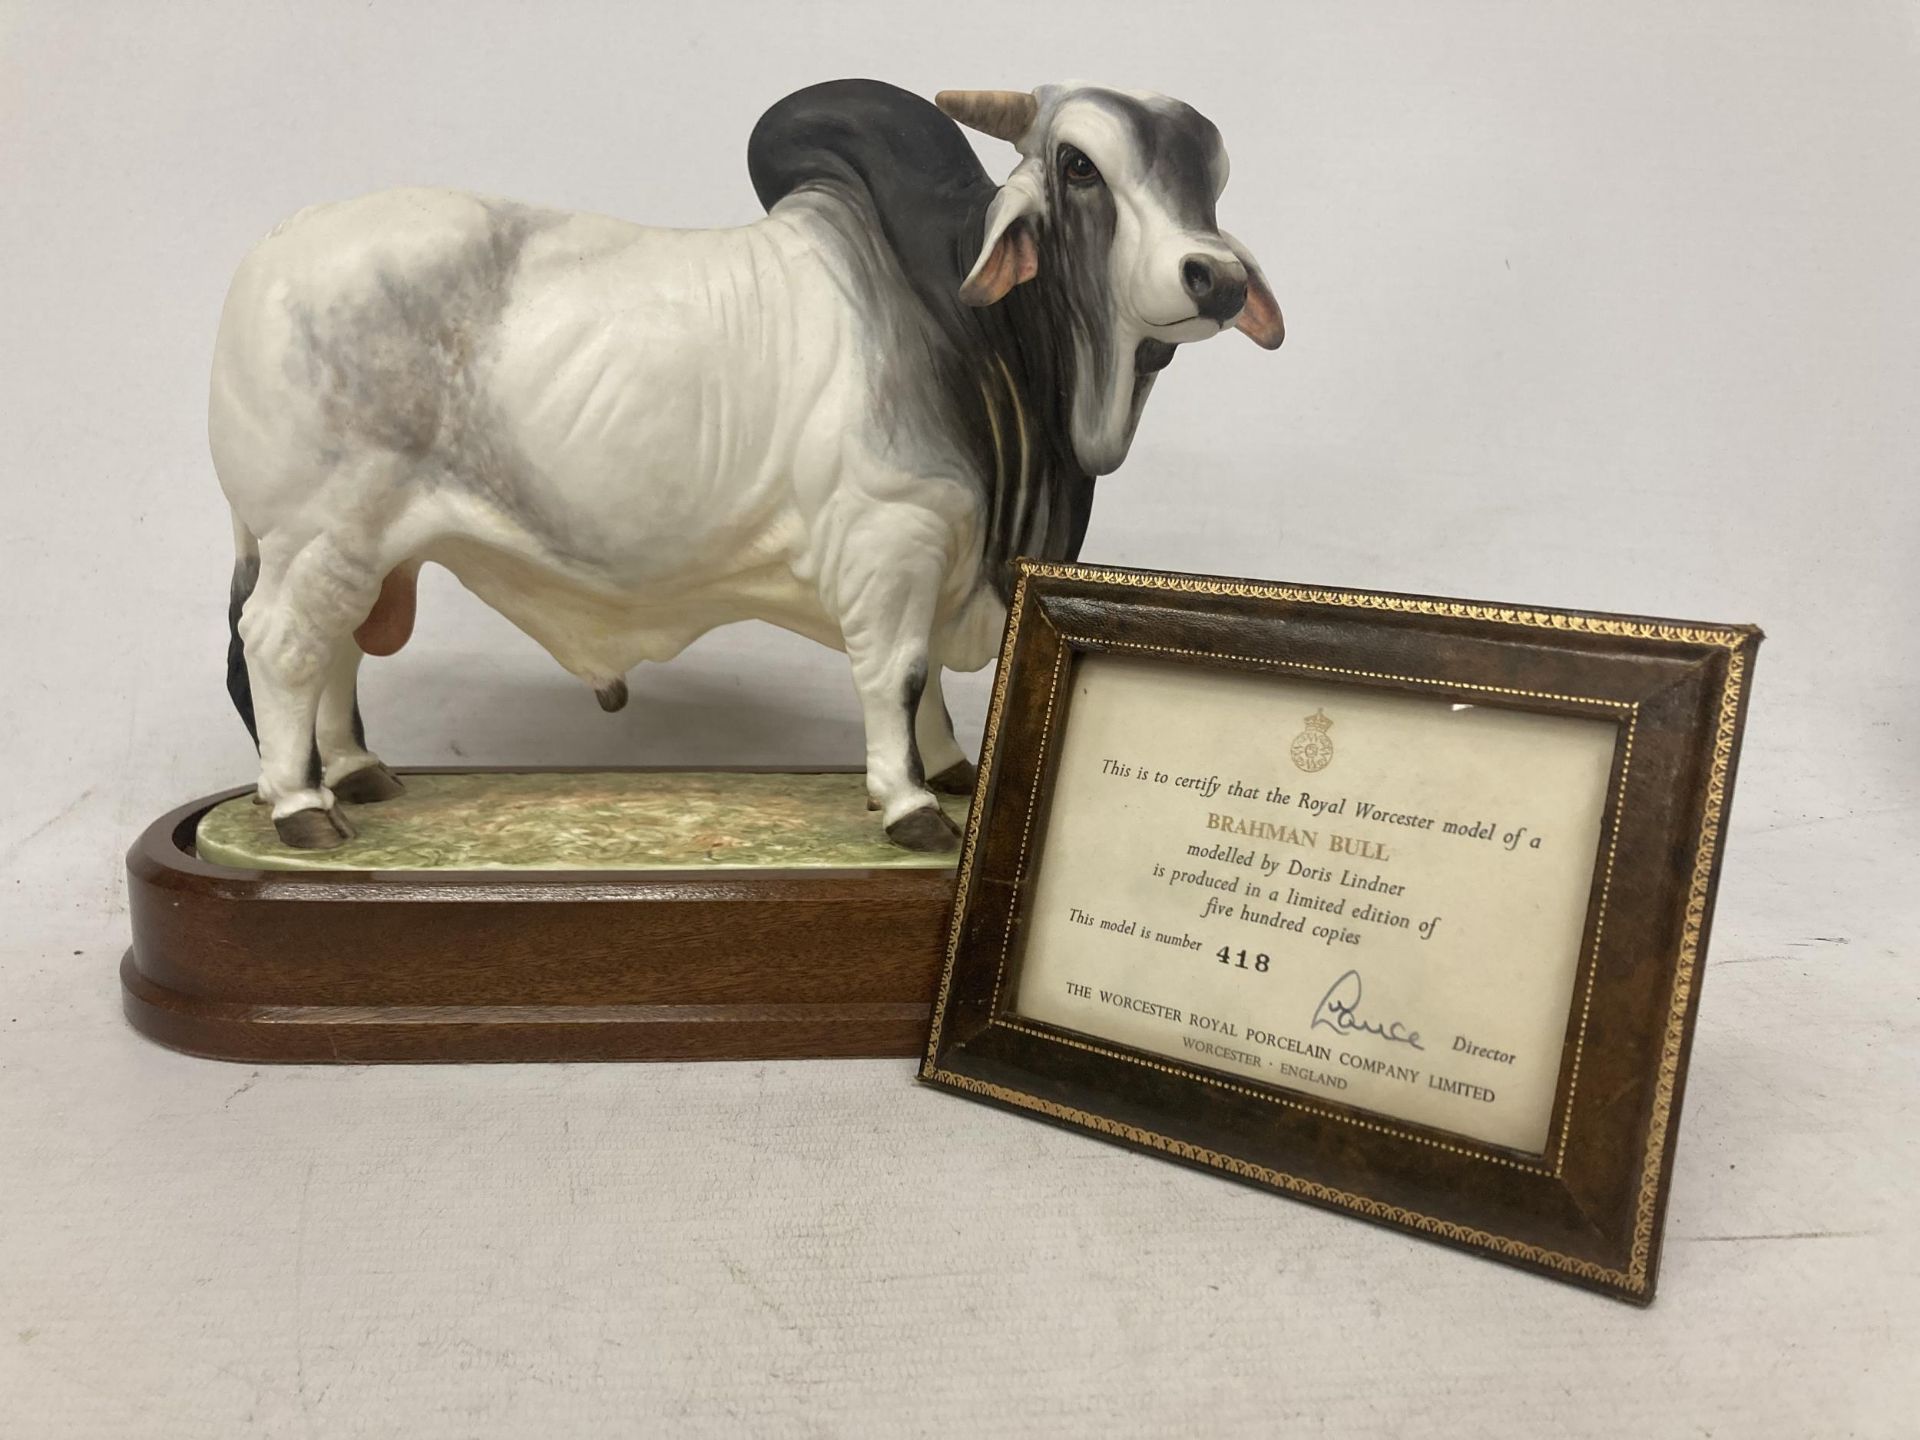 A ROYAL WORCESTER MODEL OF A BRAHMAN BULL MODELLED BY DORIS LINDNER AND PRODUCED IN A LIMITED